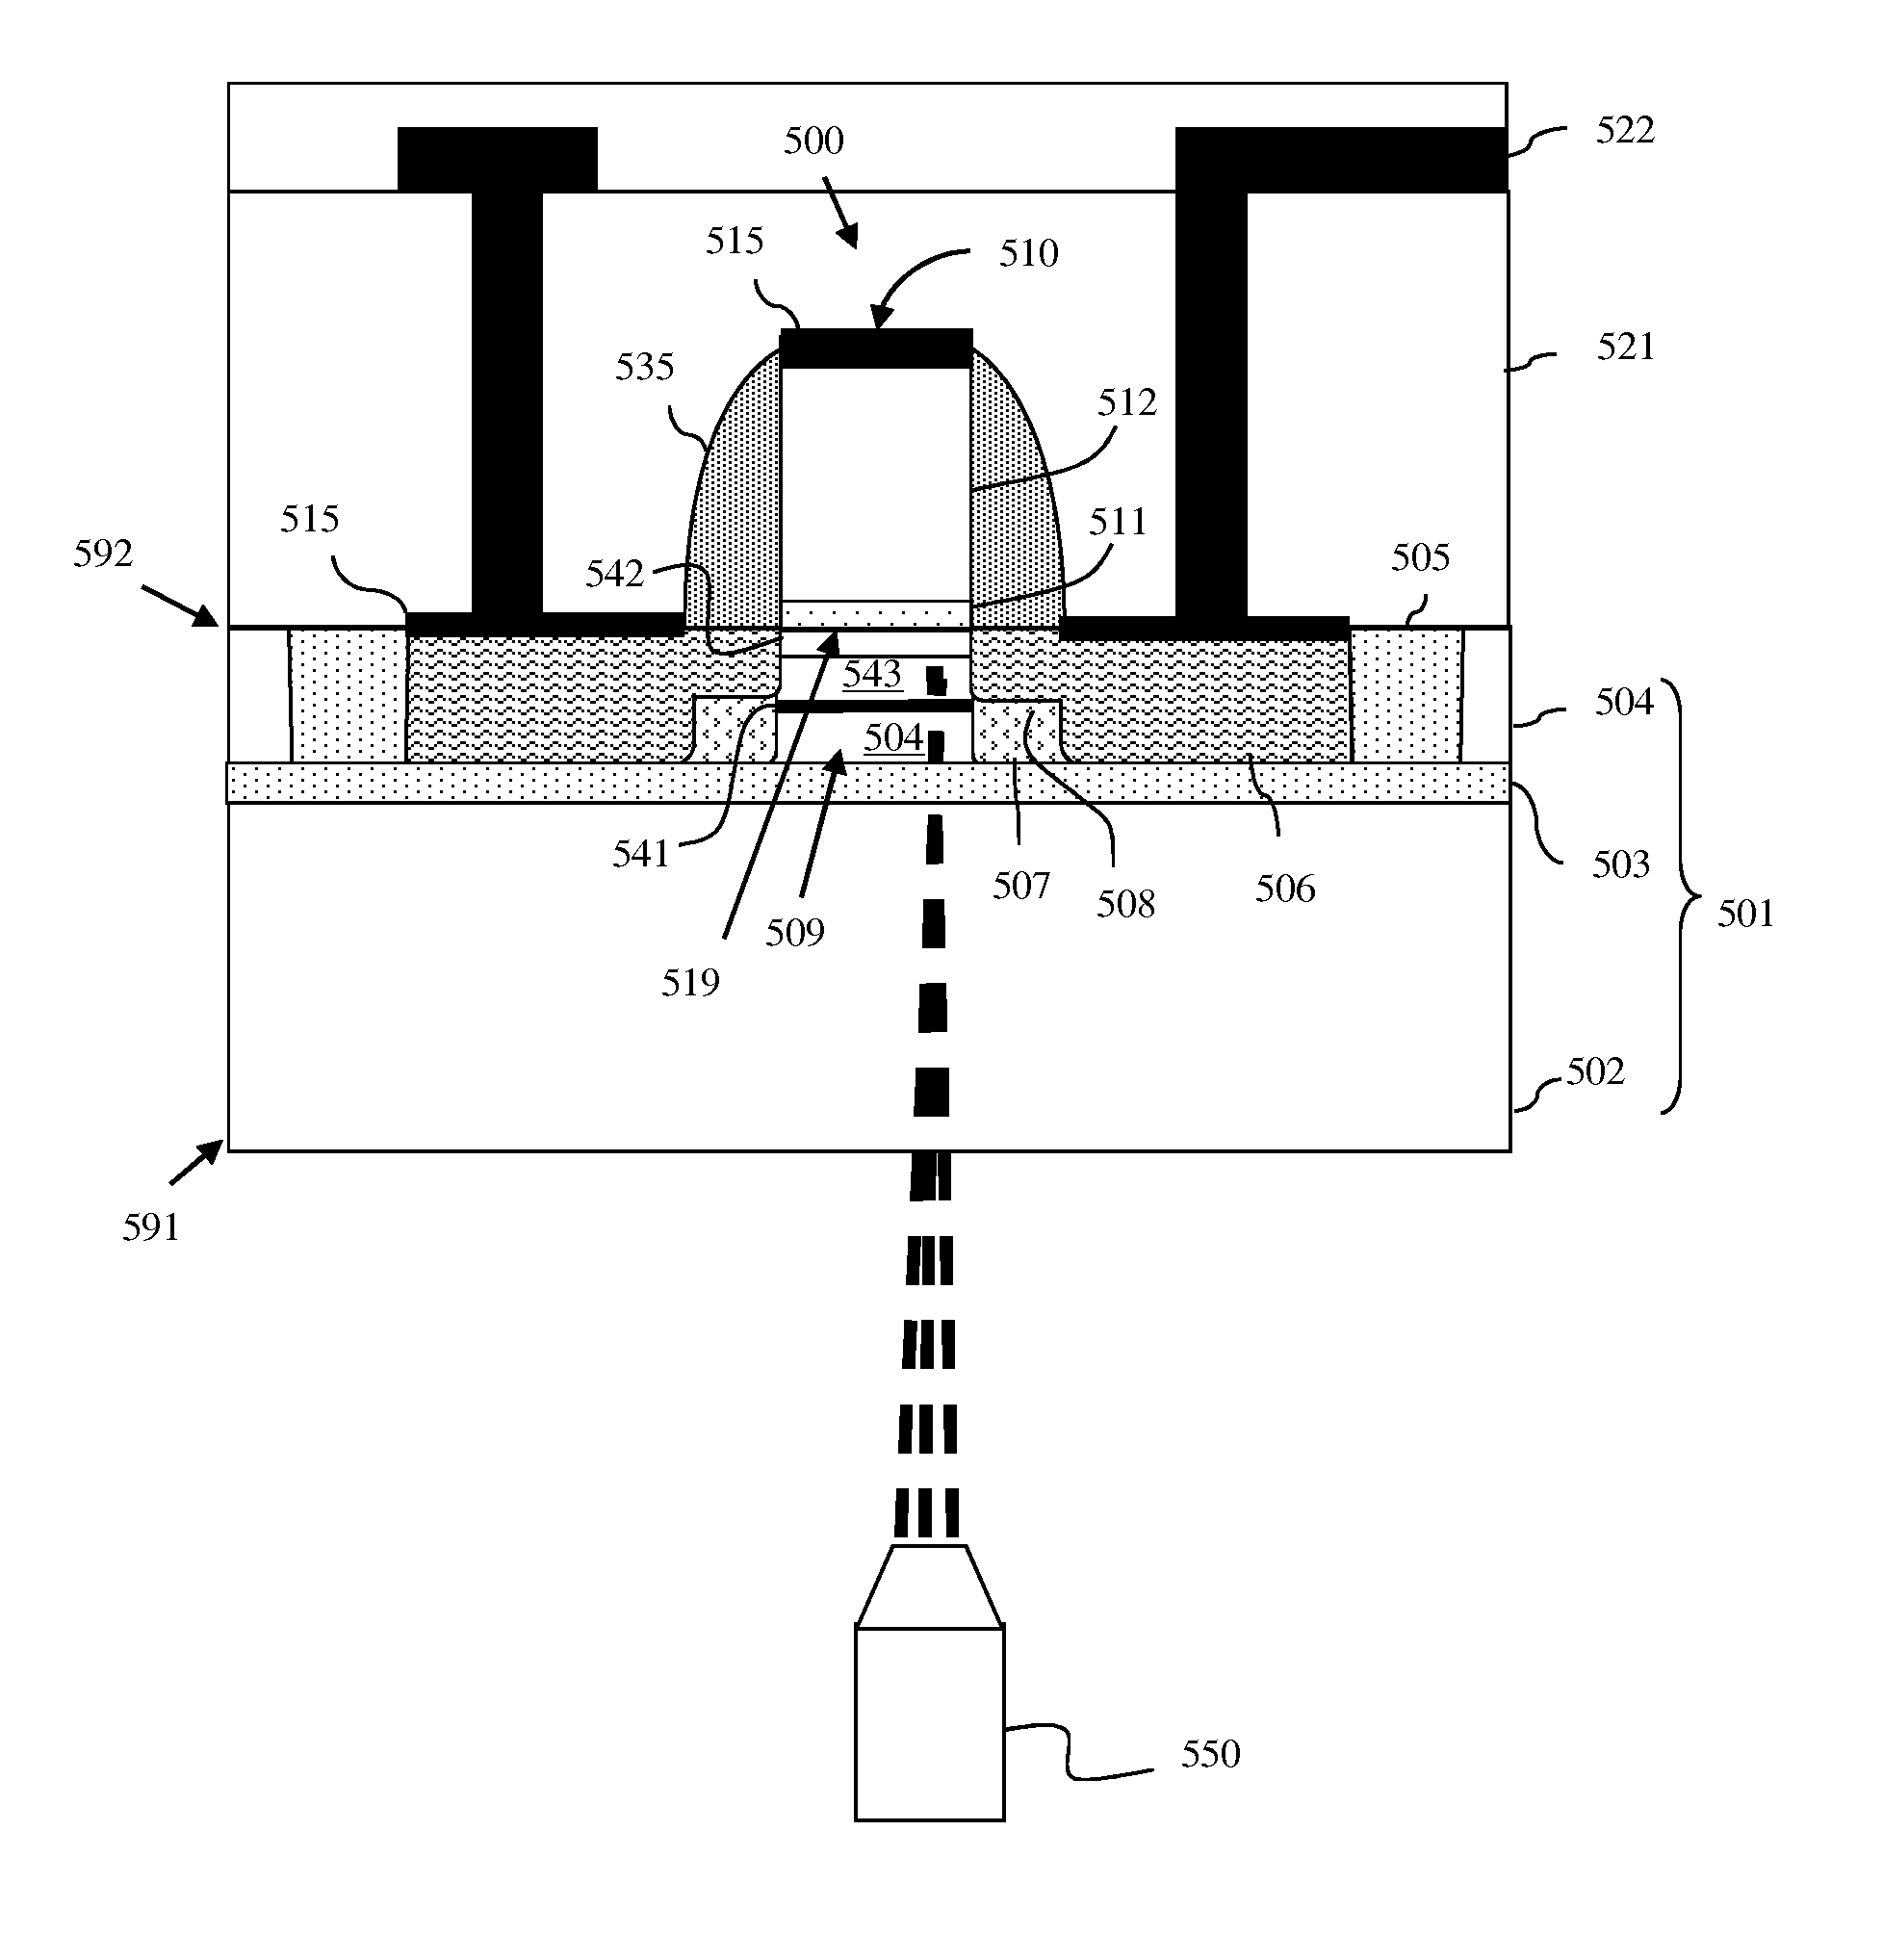 Semiconductor wafer processing method that allows device regions to be selectively annealed following back end of the line (BEOL) metal wiring layer formation